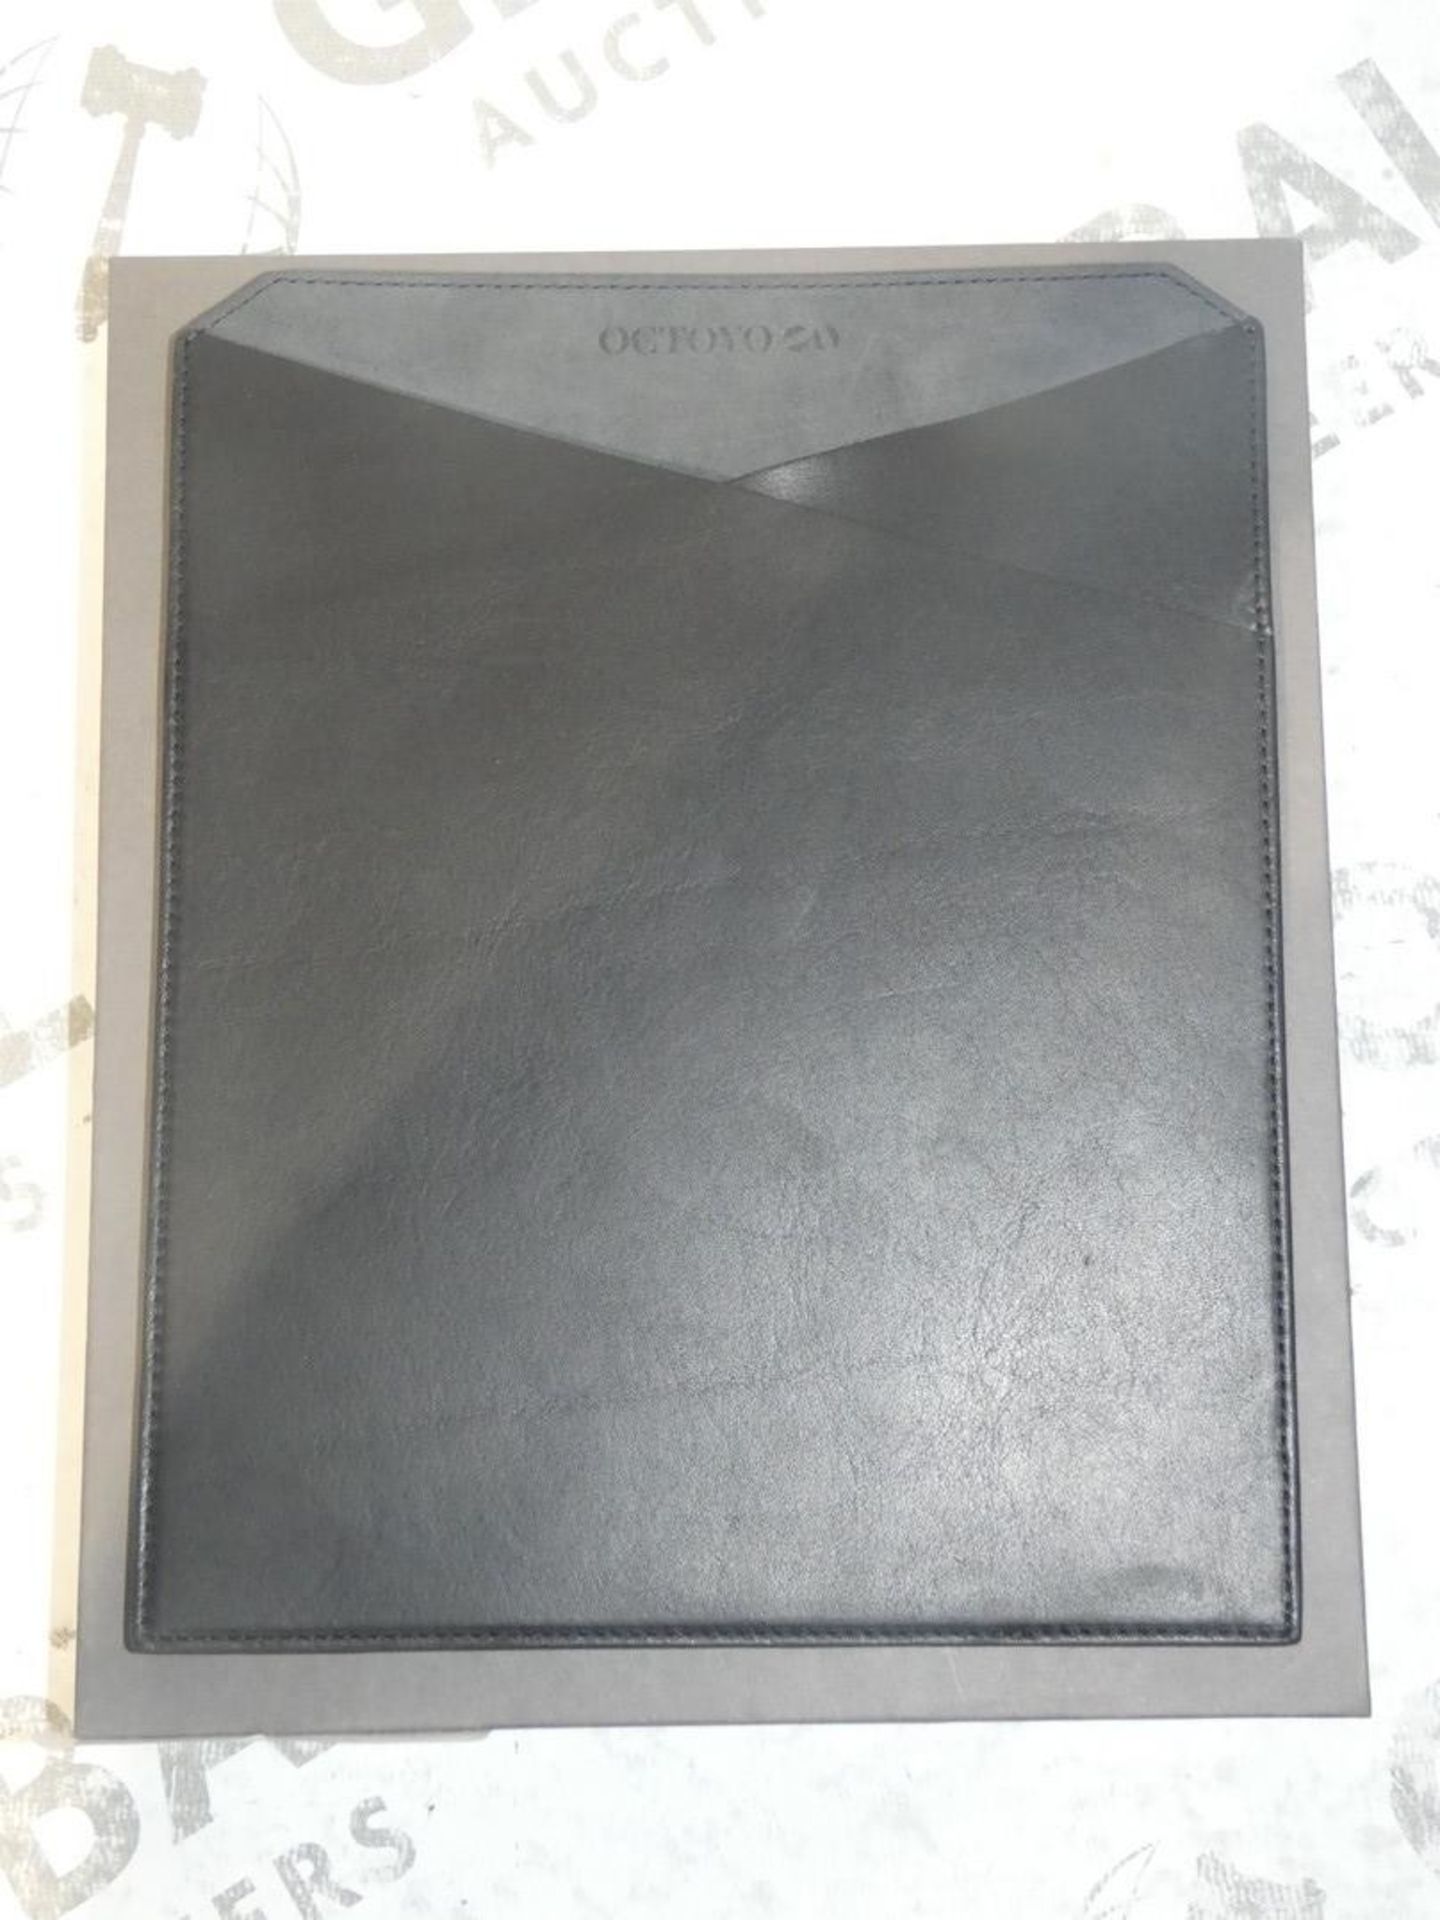 Boxed Octavo Black Leather Designer Dual Layer iPad Sleeve RRP£100.0 (Viewings And Appraisals Highly